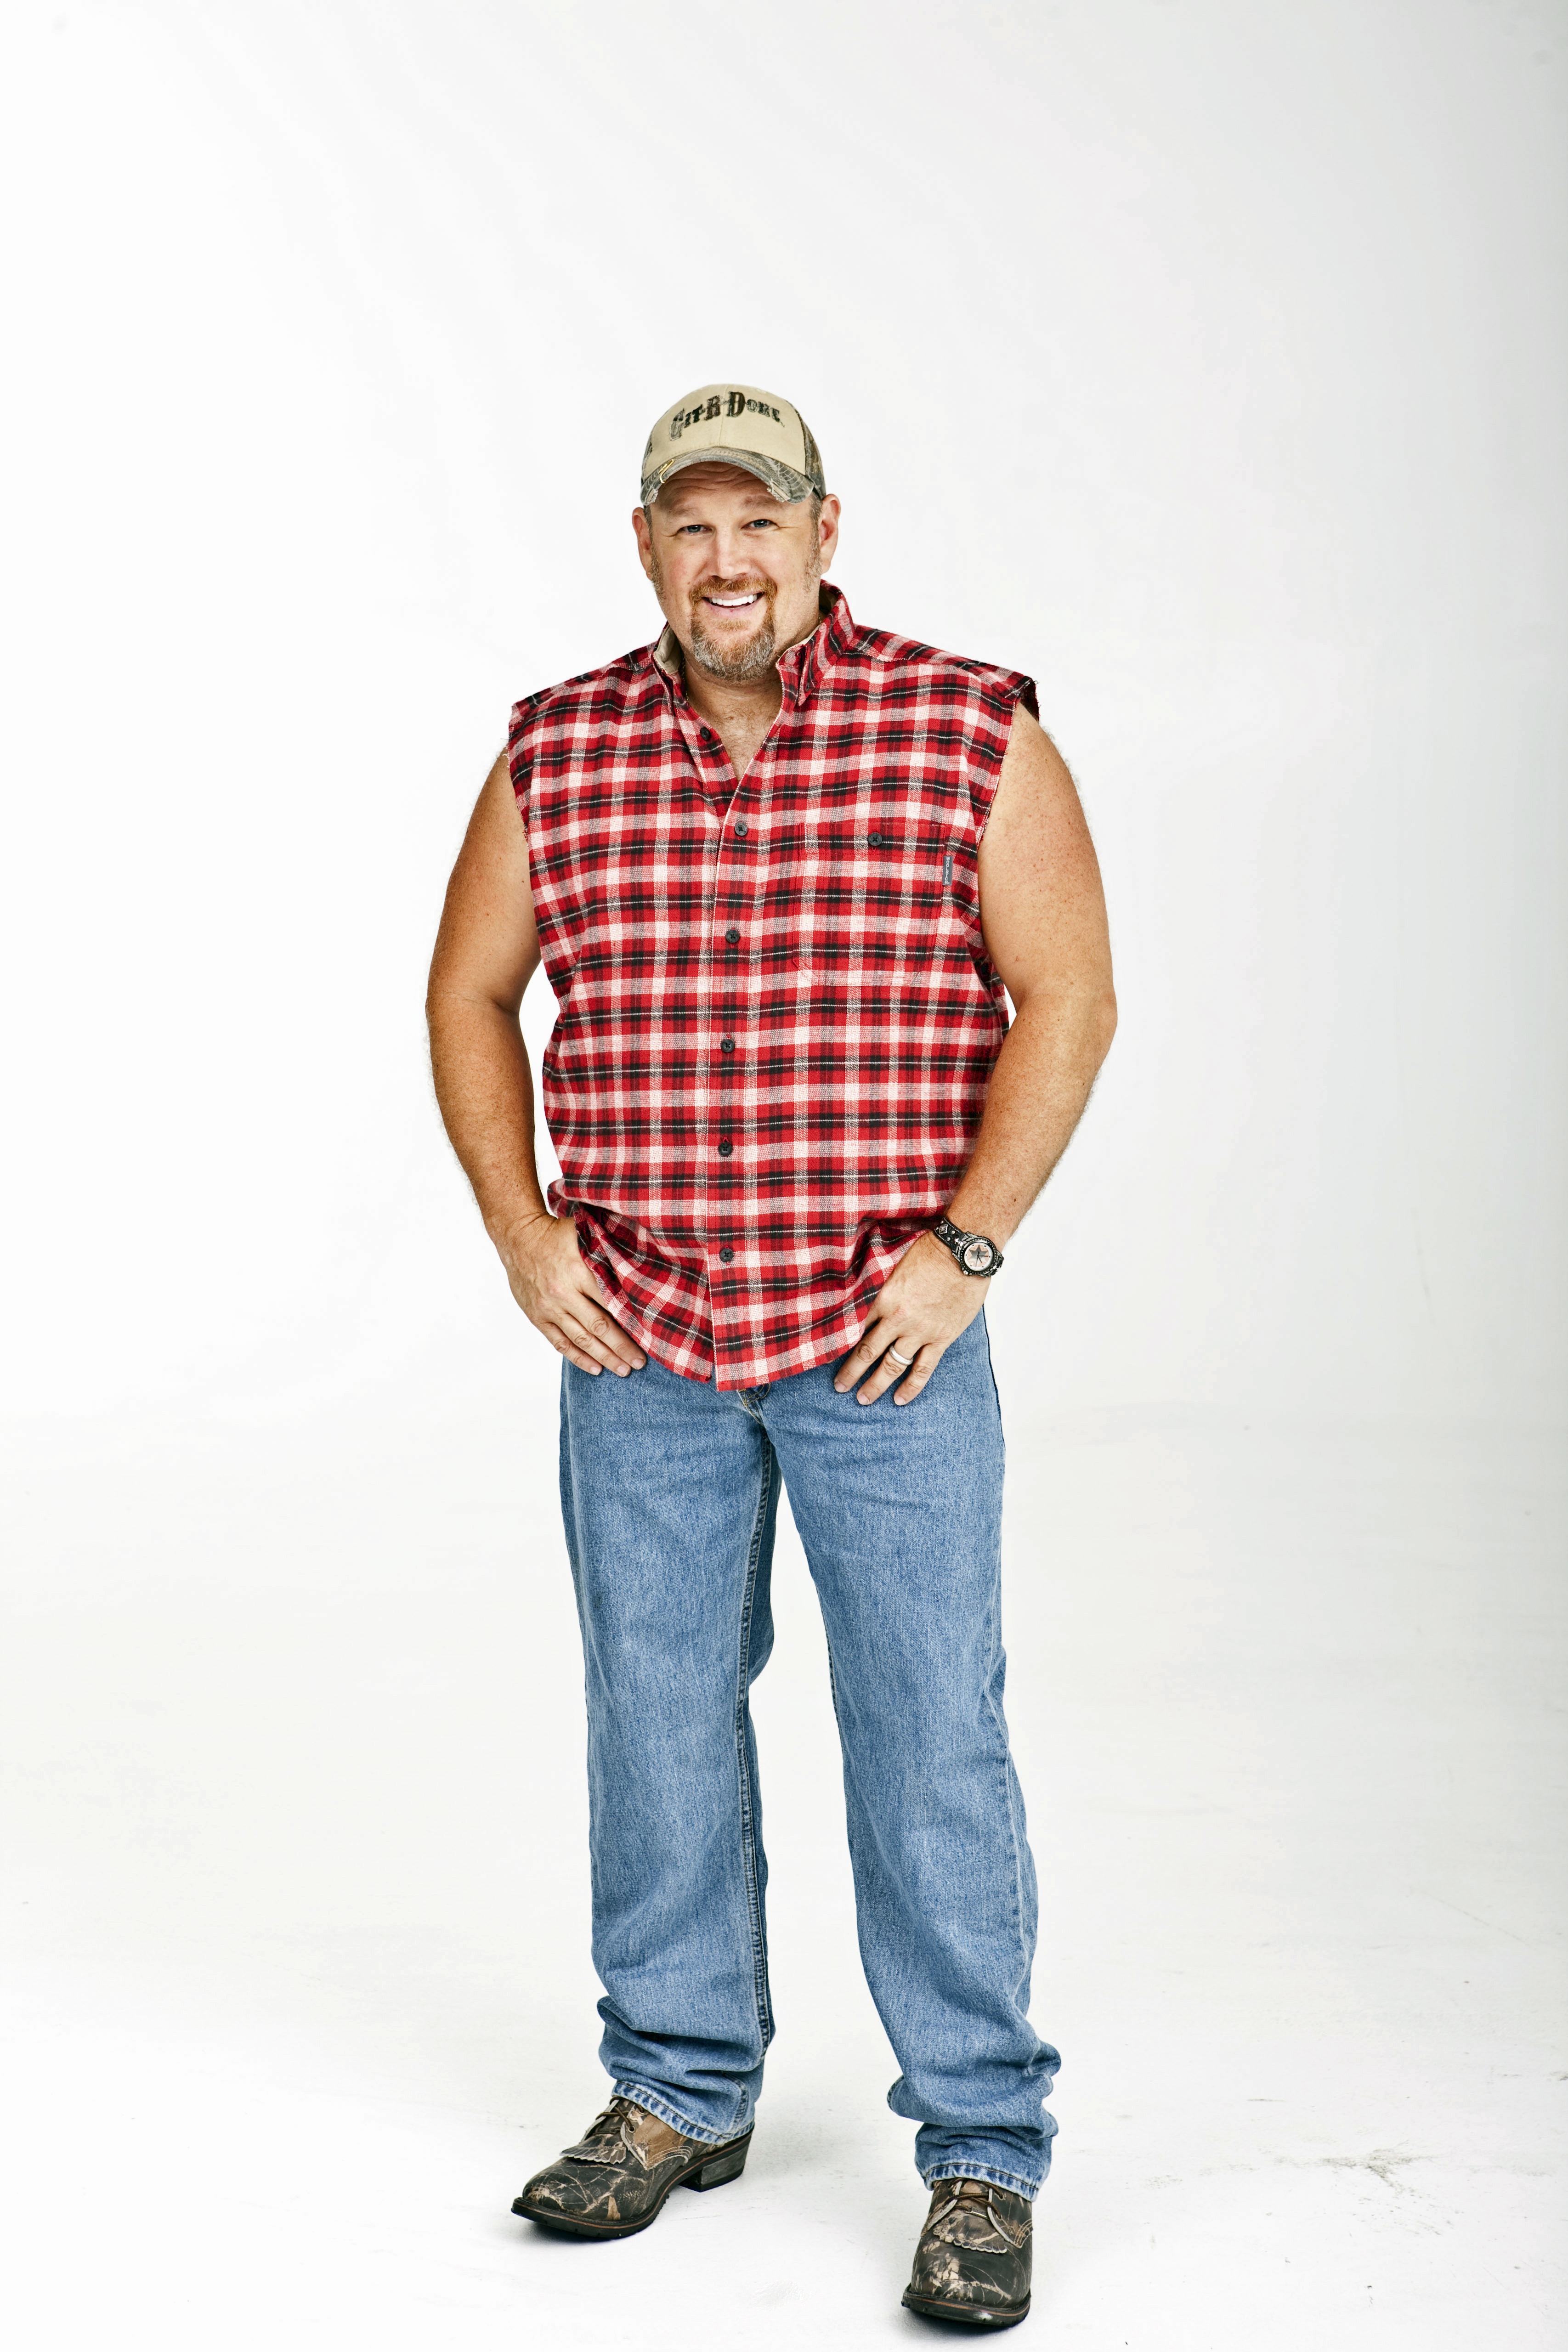 images-of-larry-the-cable-guy